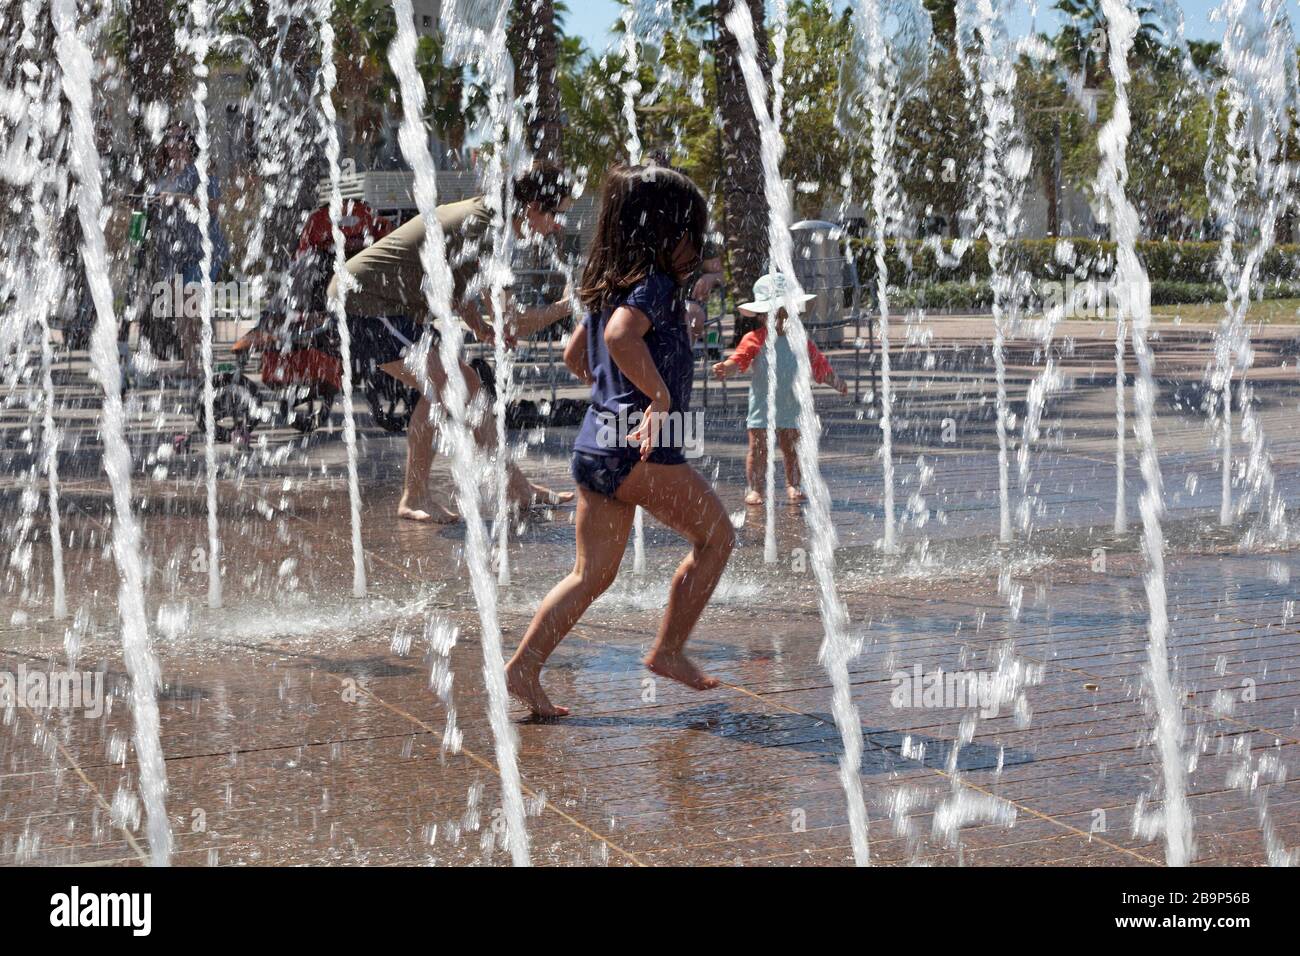 Water play is enjoyed by families at Curtis Hixon Waterfront Park in Tampa, Florida, USA. Stock Photo